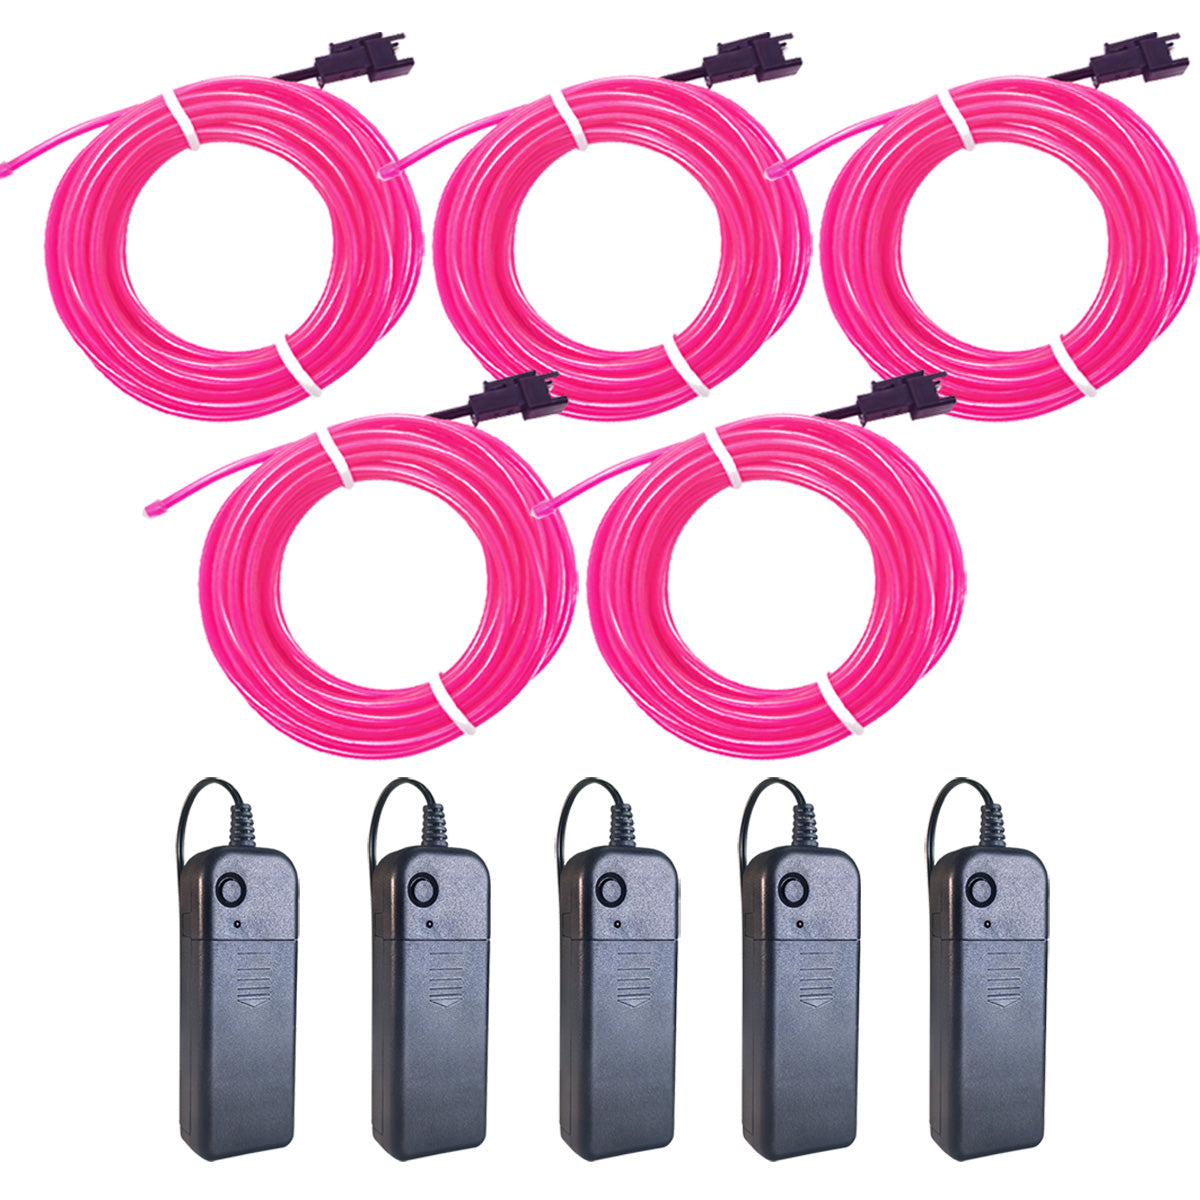 EL Wire Portable 5 Set (Green, Blue, Red, White, Pink)50% Discount if you  use discount code – maxlaxer